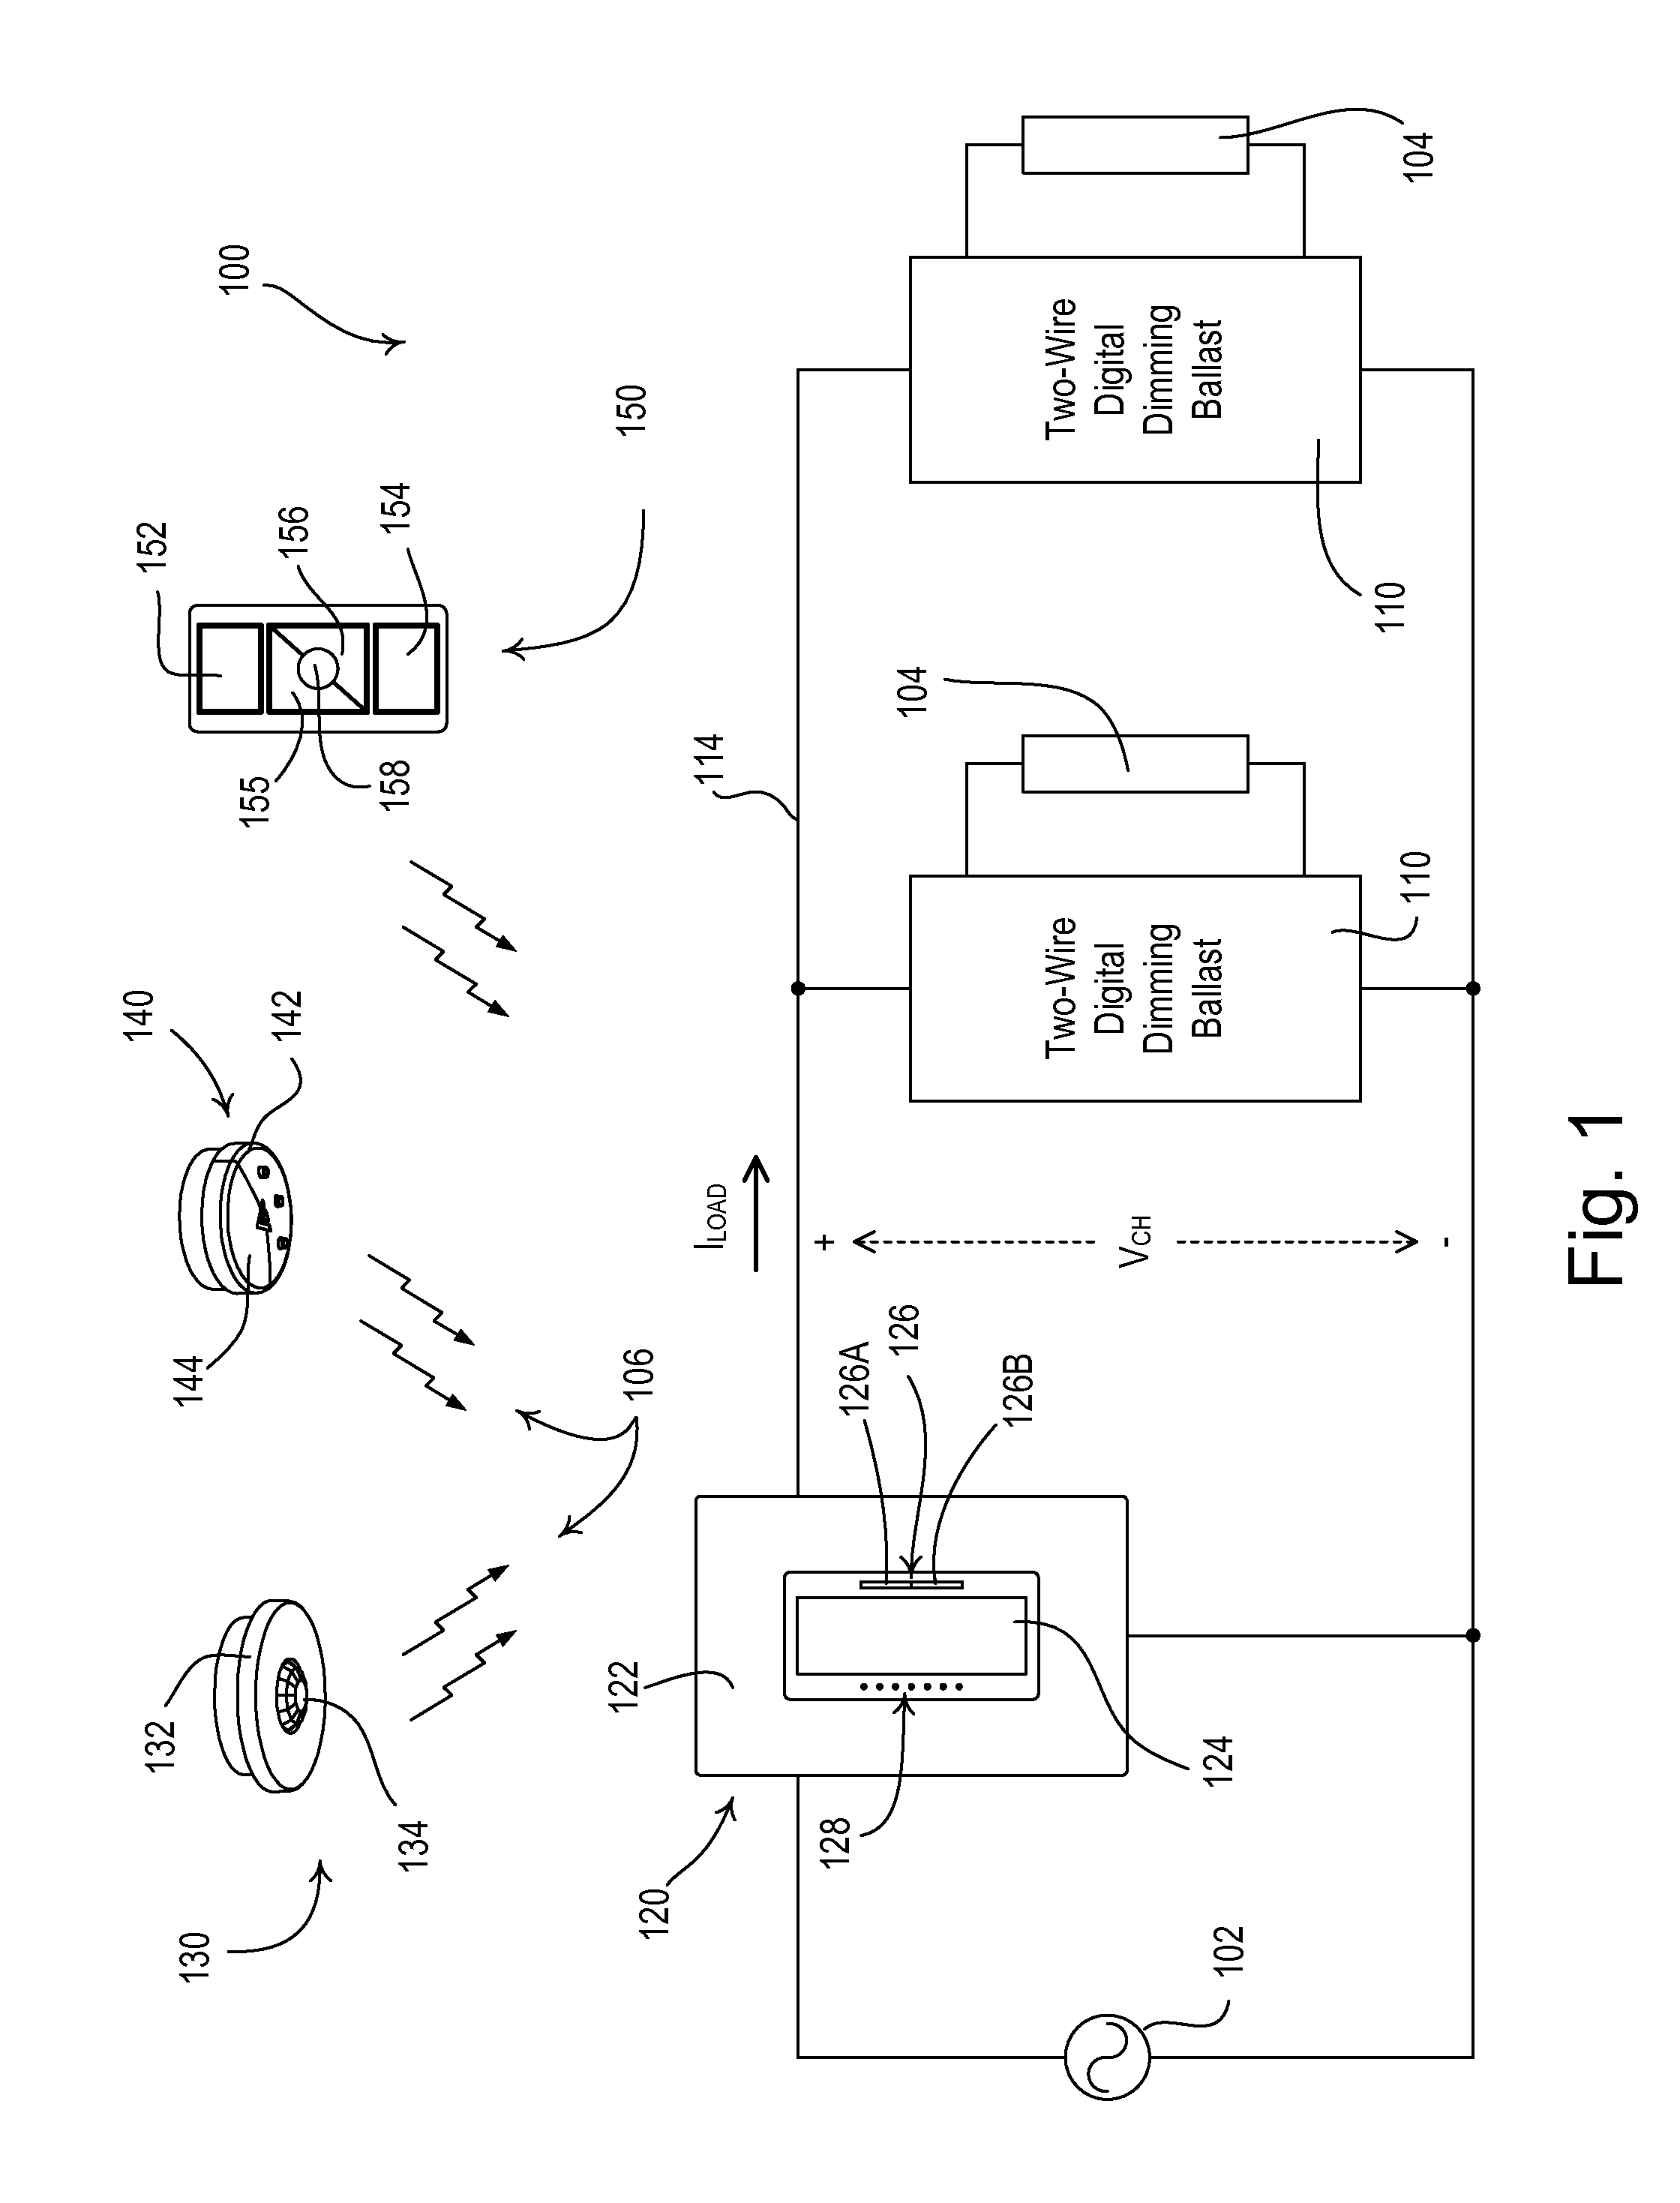 Charging an input capacitor of a load control device